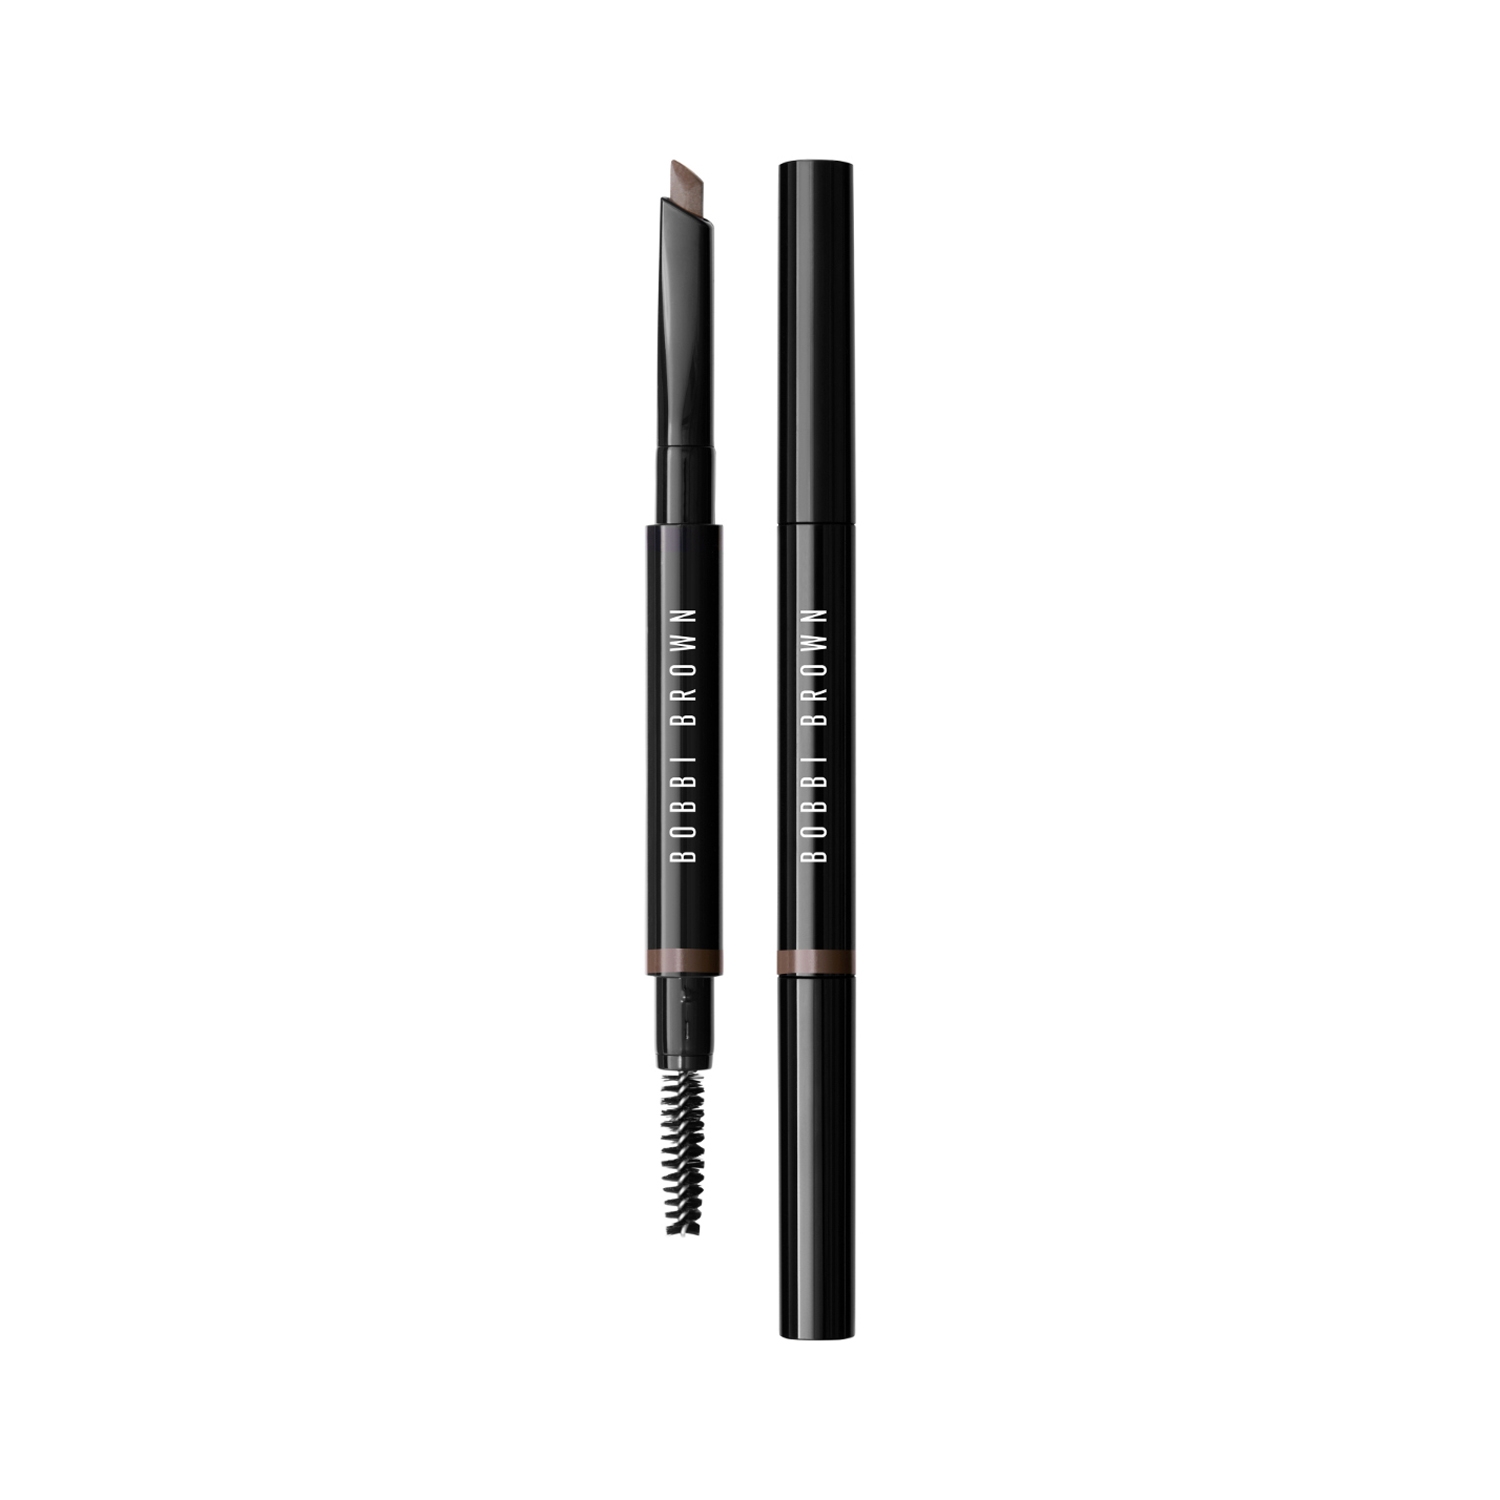 Bobbi Brown Perfectly Defined Long-Wear Brow Pencil - Saddle (0.33g)